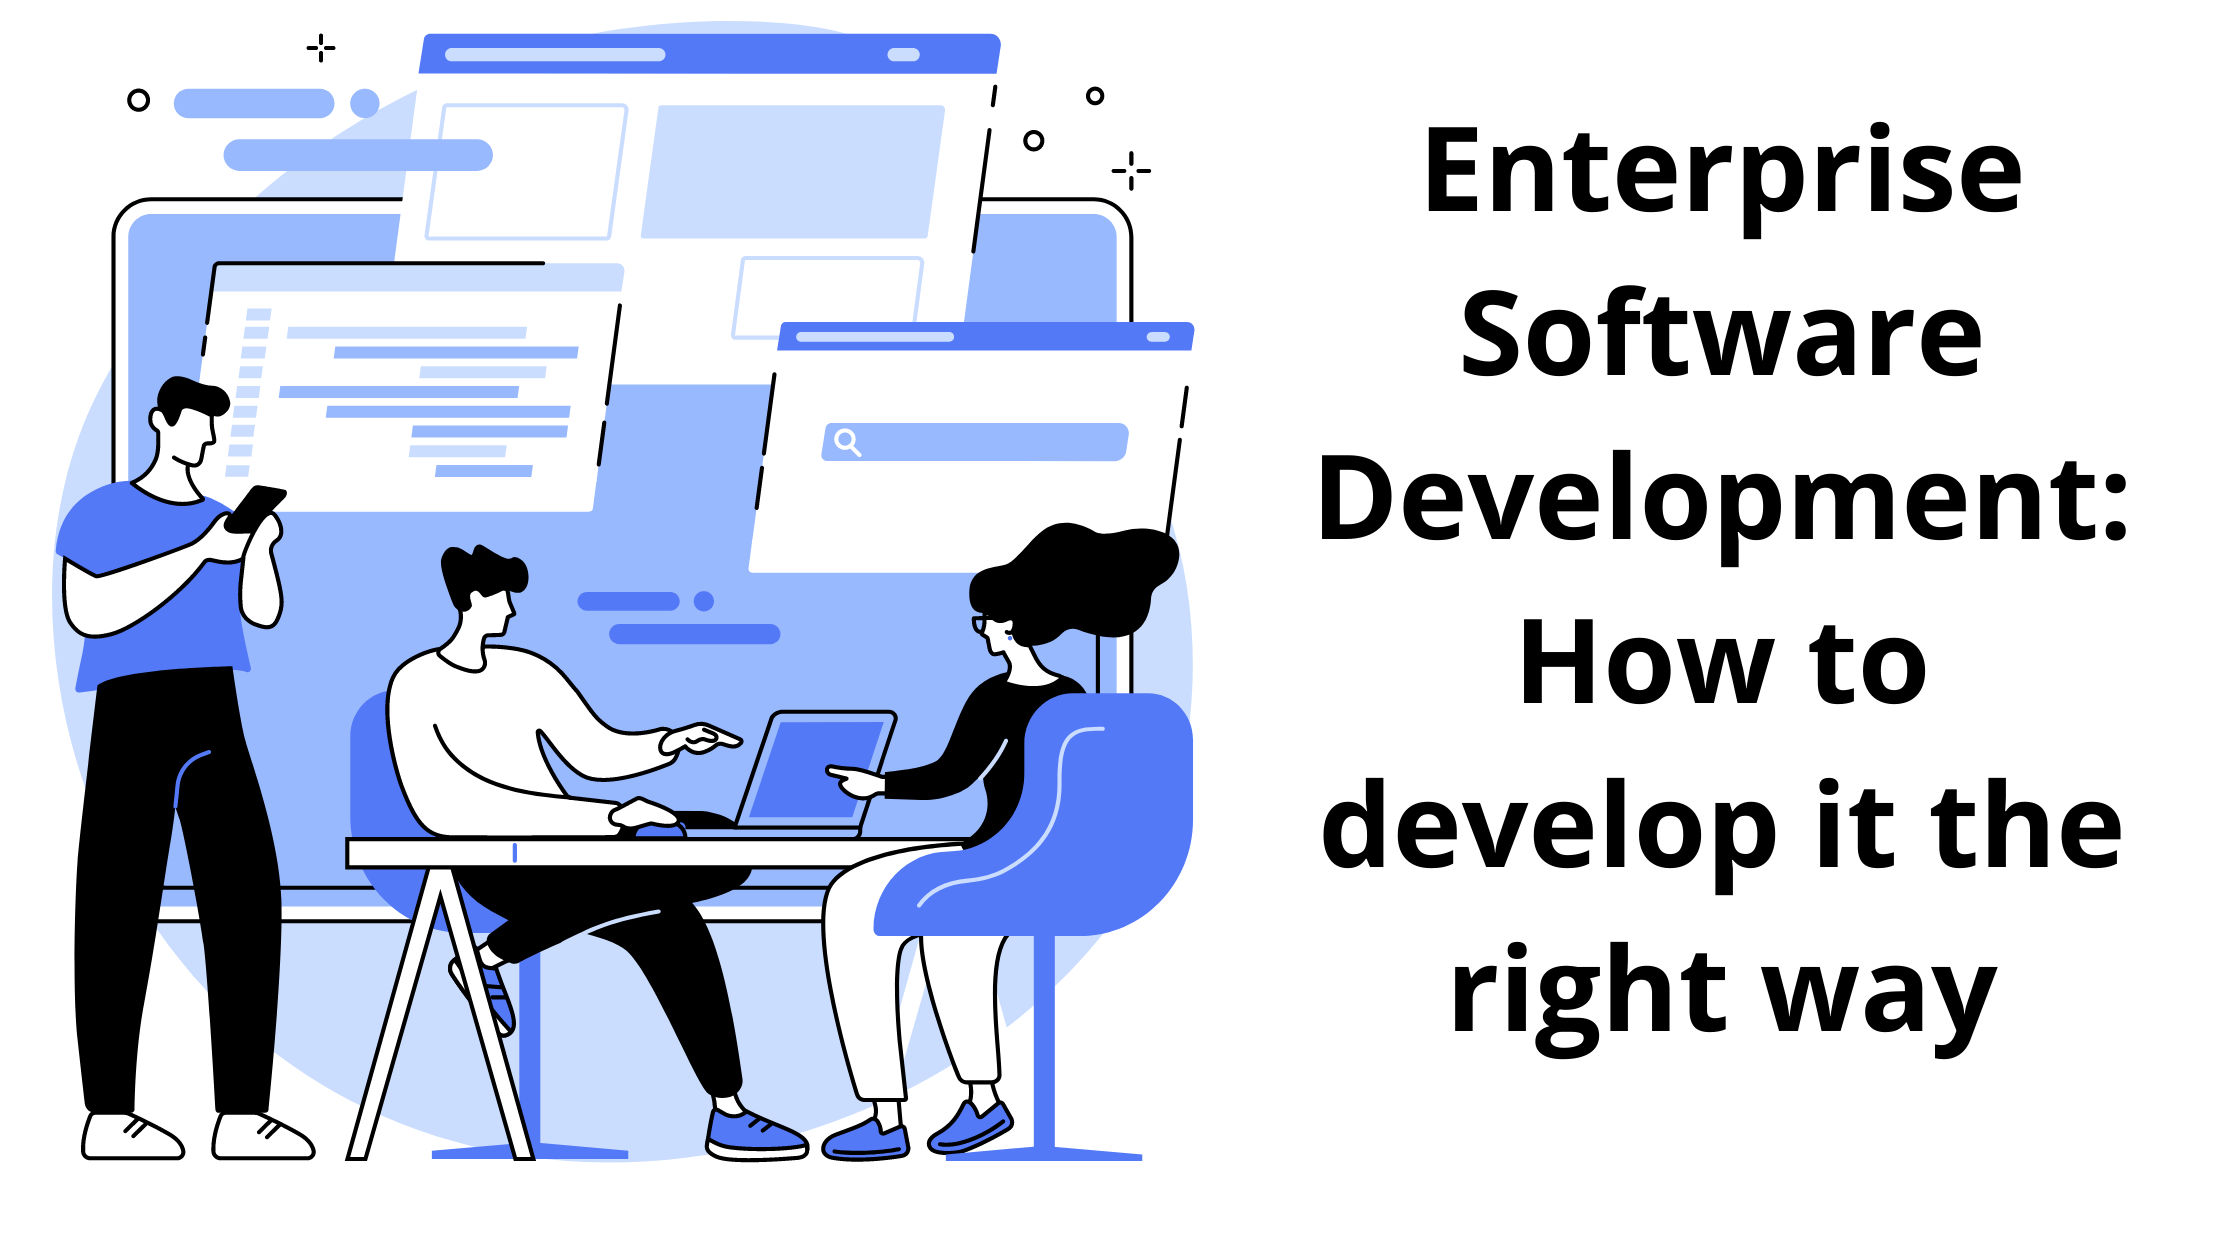 Enterprise-Software-Development-How-to-develop-it-the-right-way